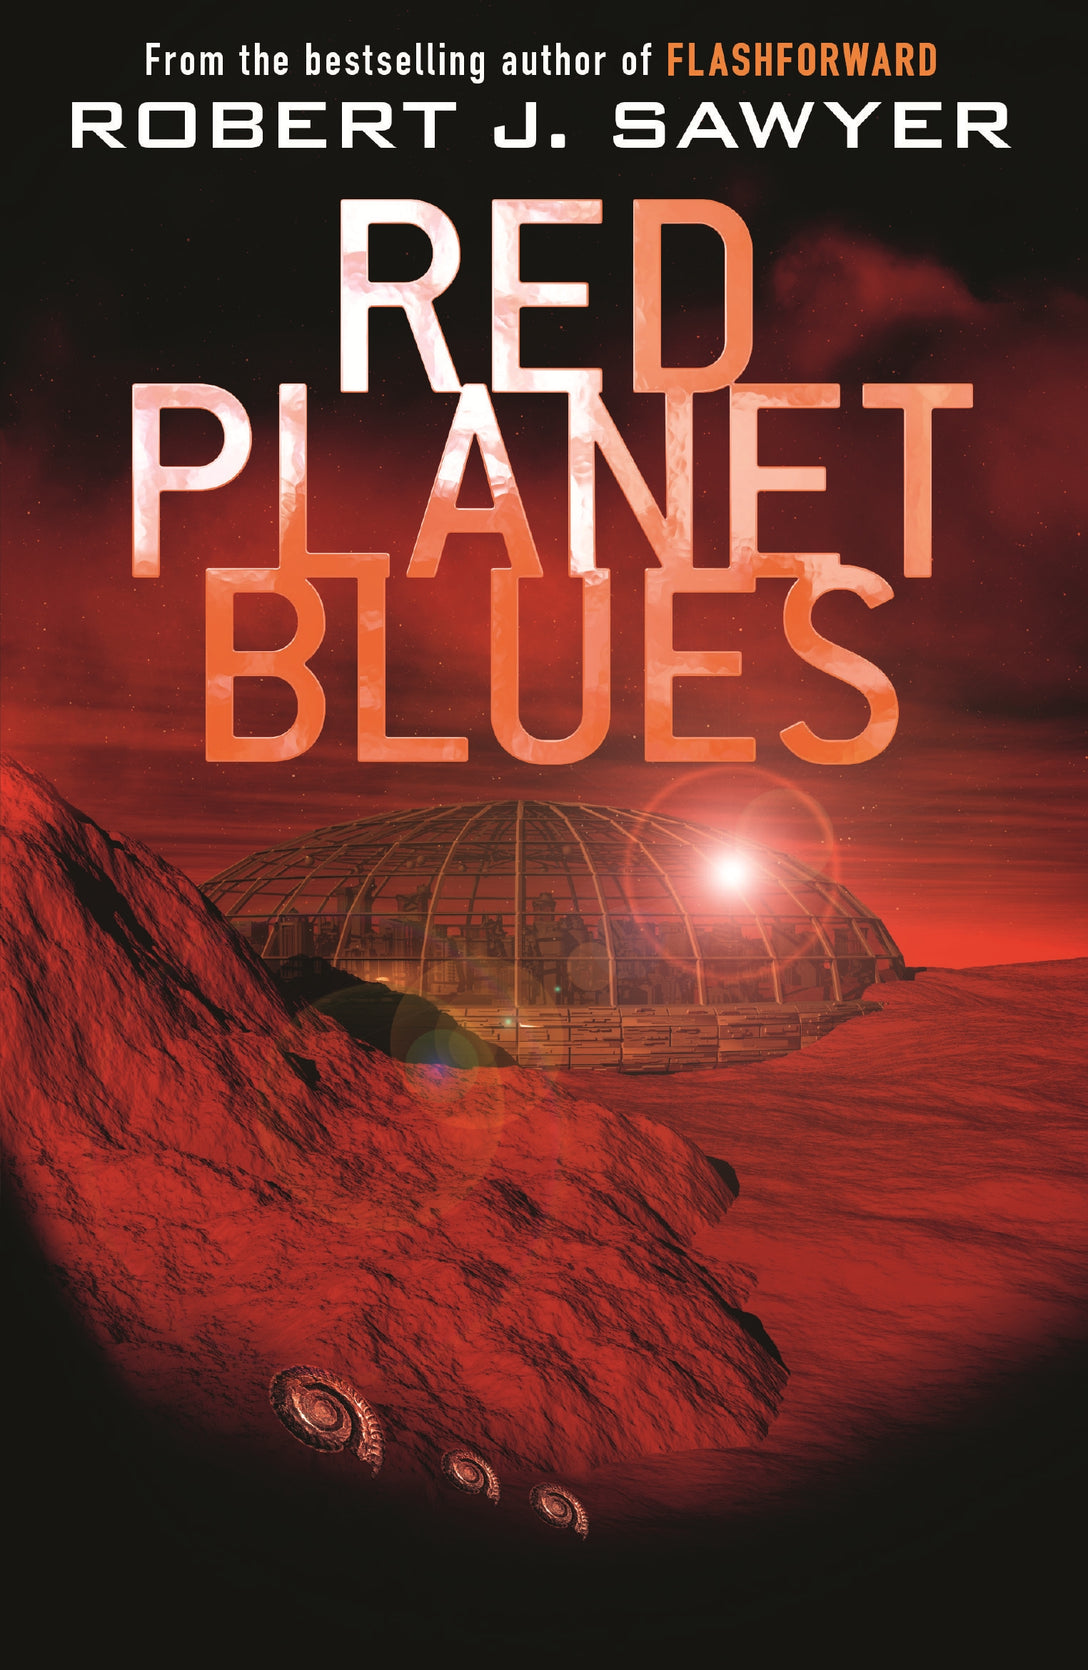 Red Planet Blues by Robert J Sawyer